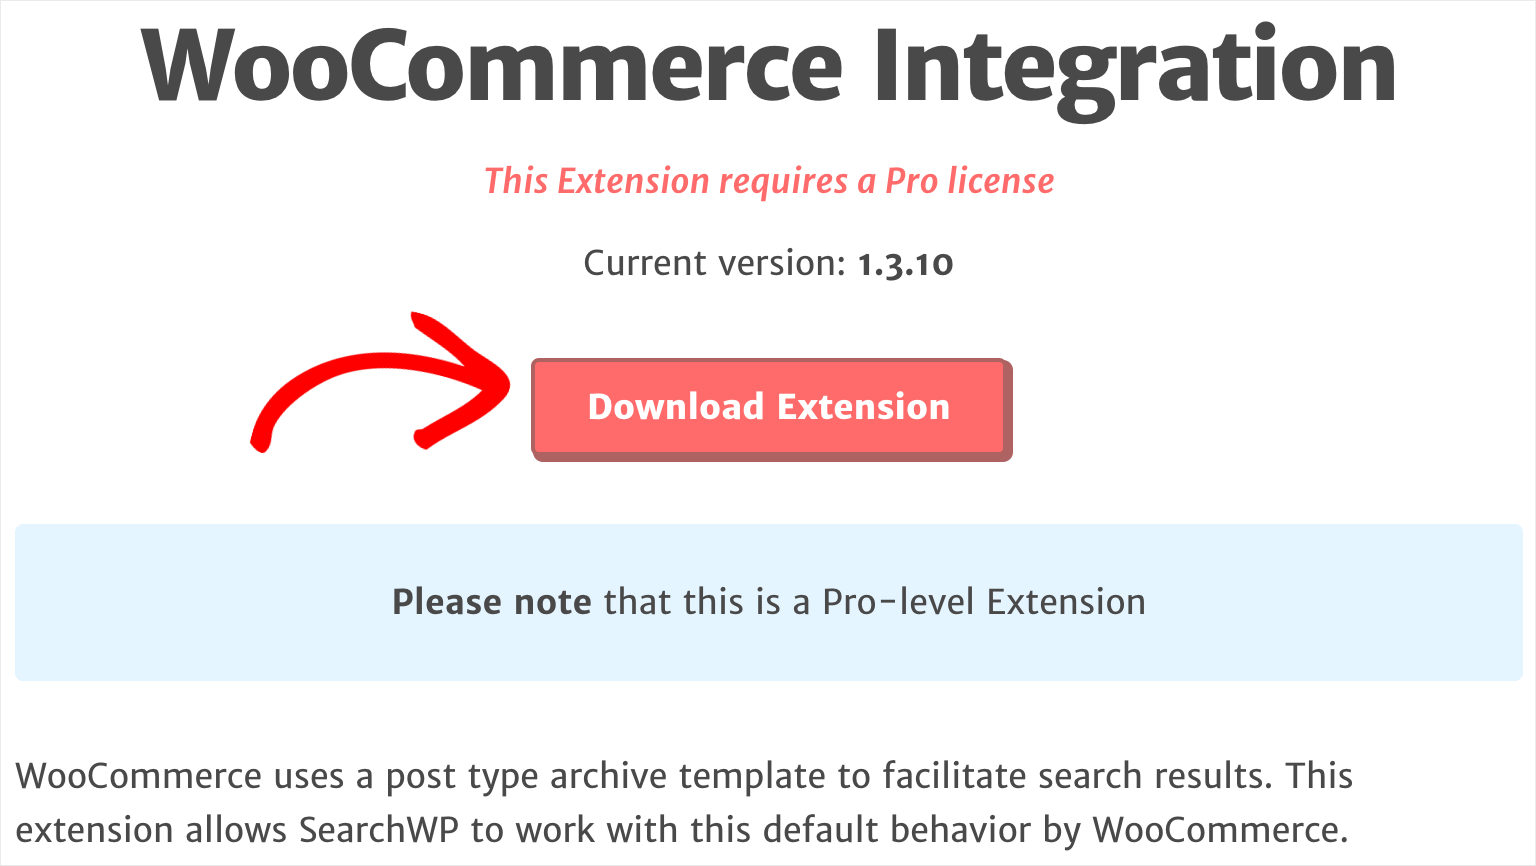 press the Download Extension button